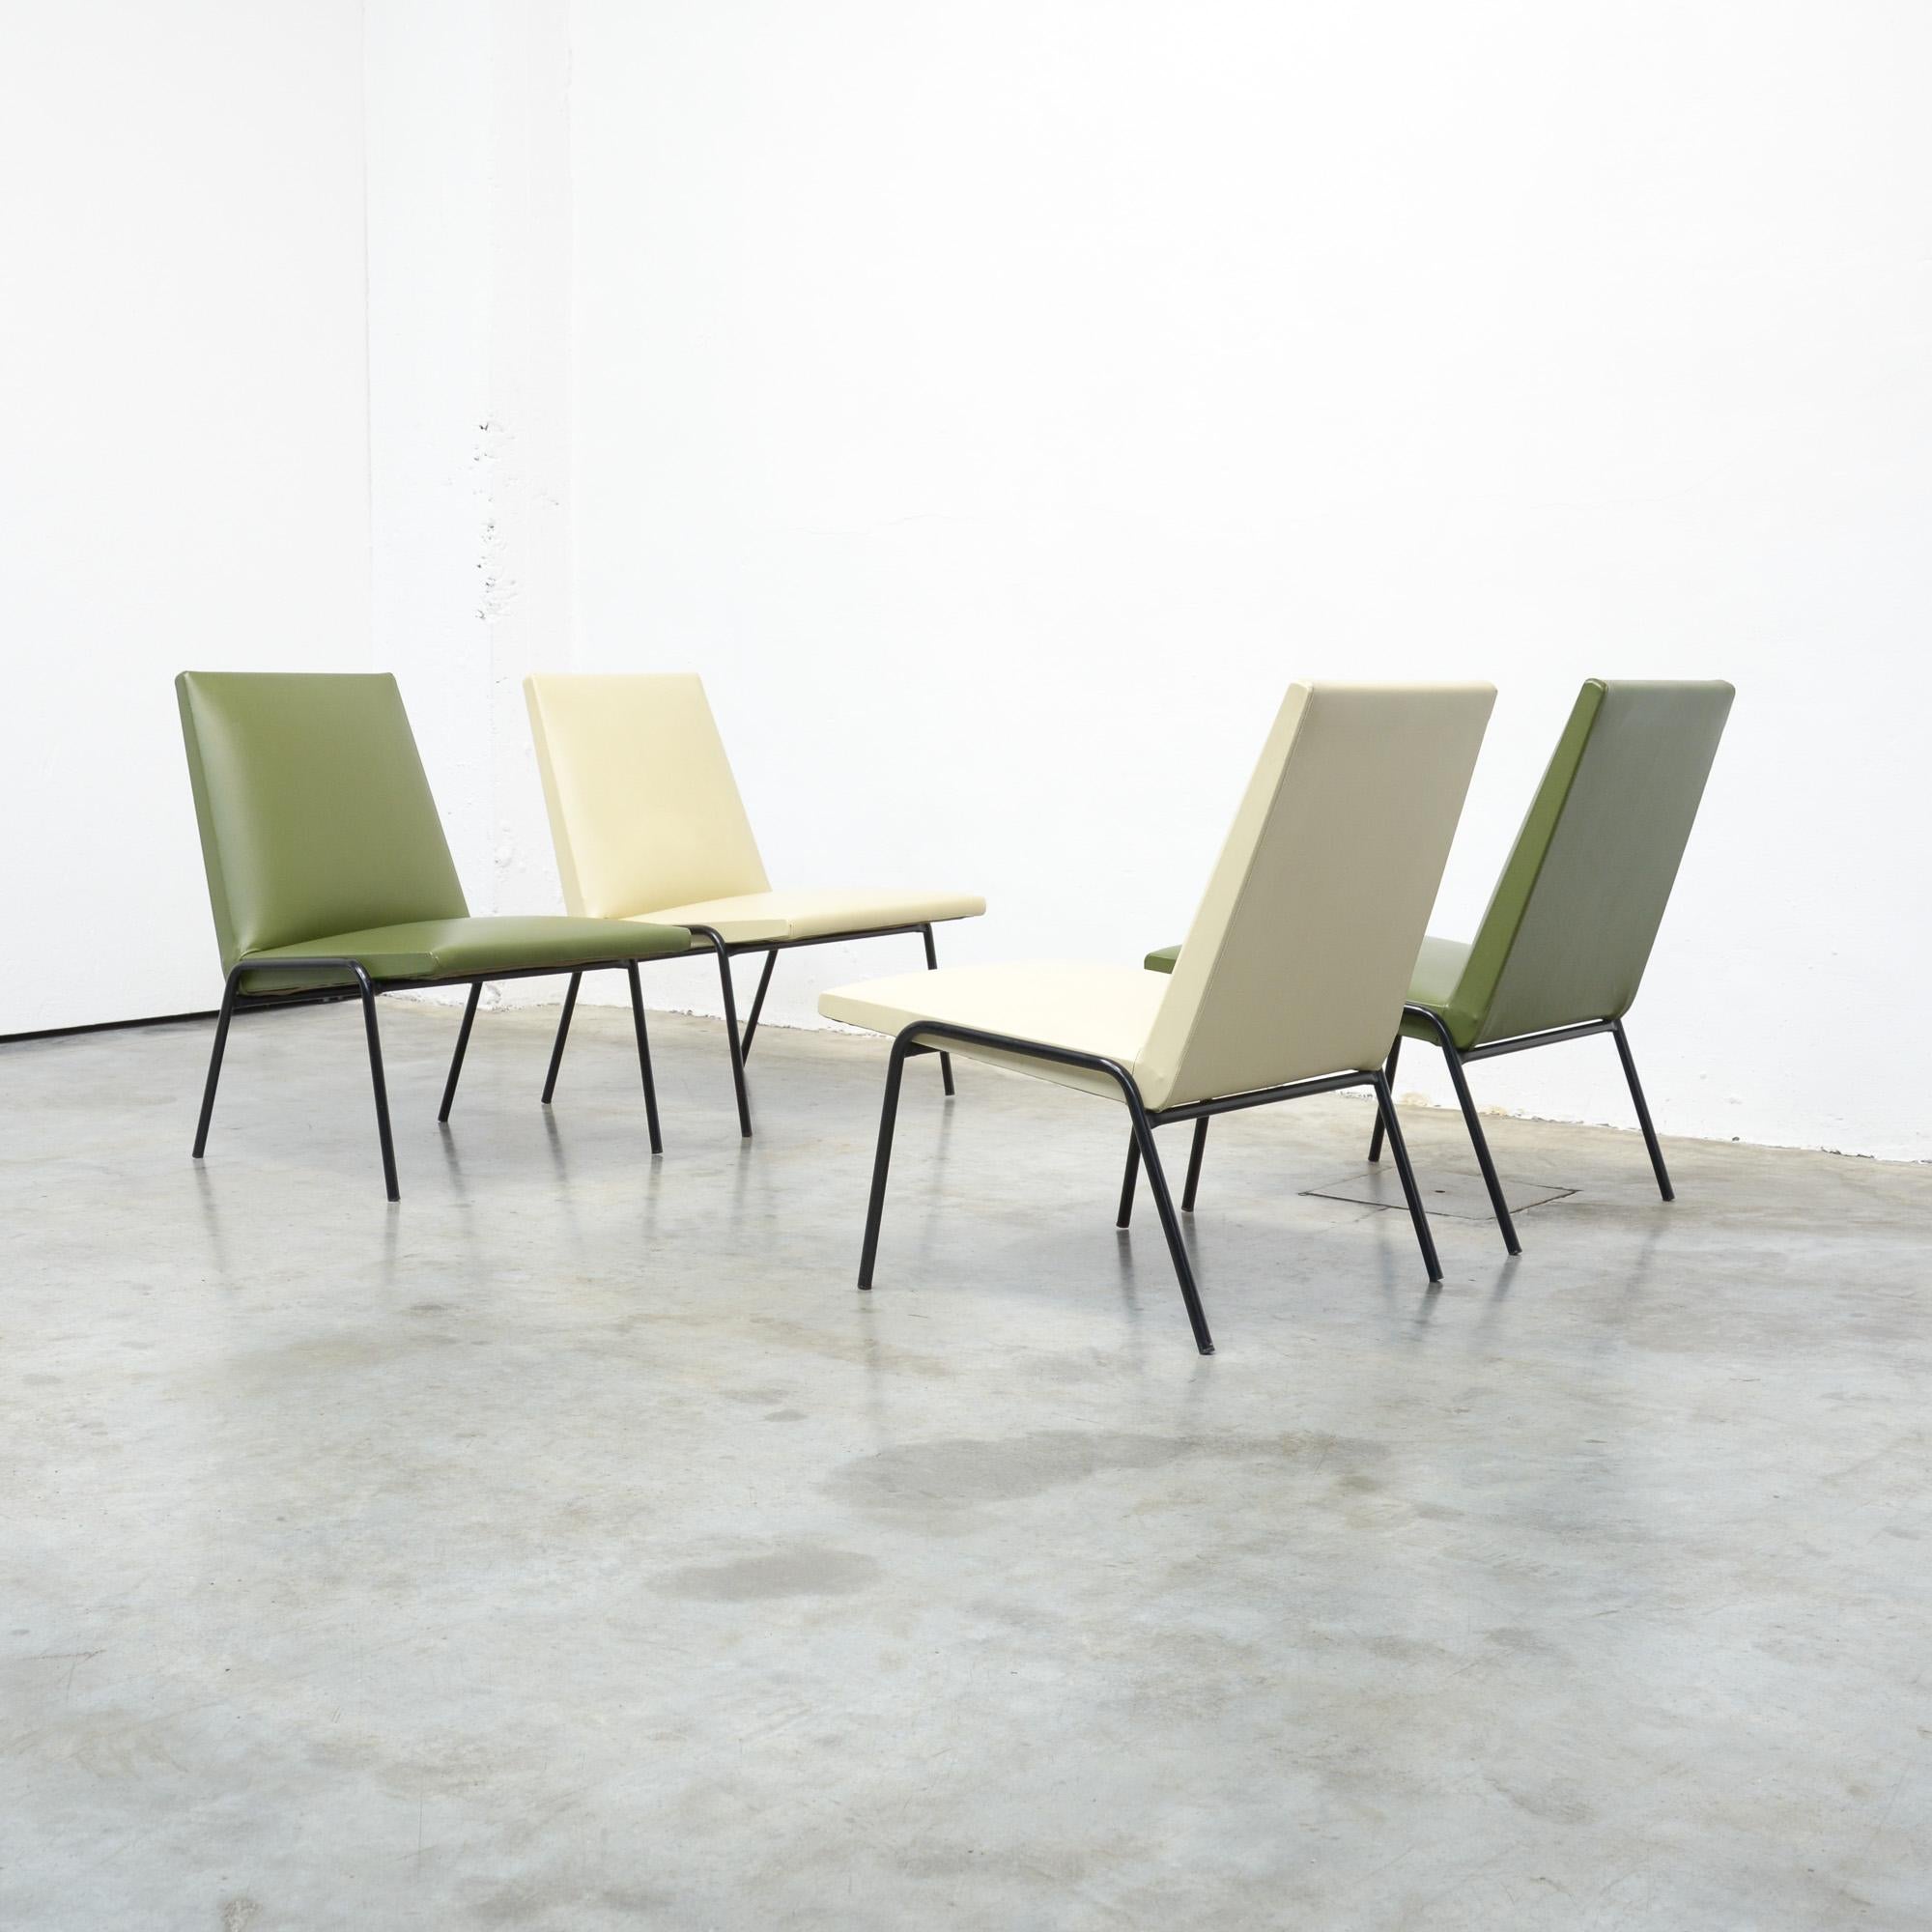 We offer you a great set of low chairs Robert by Pierre Guariche, manufactured by Meurop in the 1960s.
We have a pair in beige leatherette and a pair in moss-green leatherette. The simple base is made of black lacquered metal.
These low chairs are